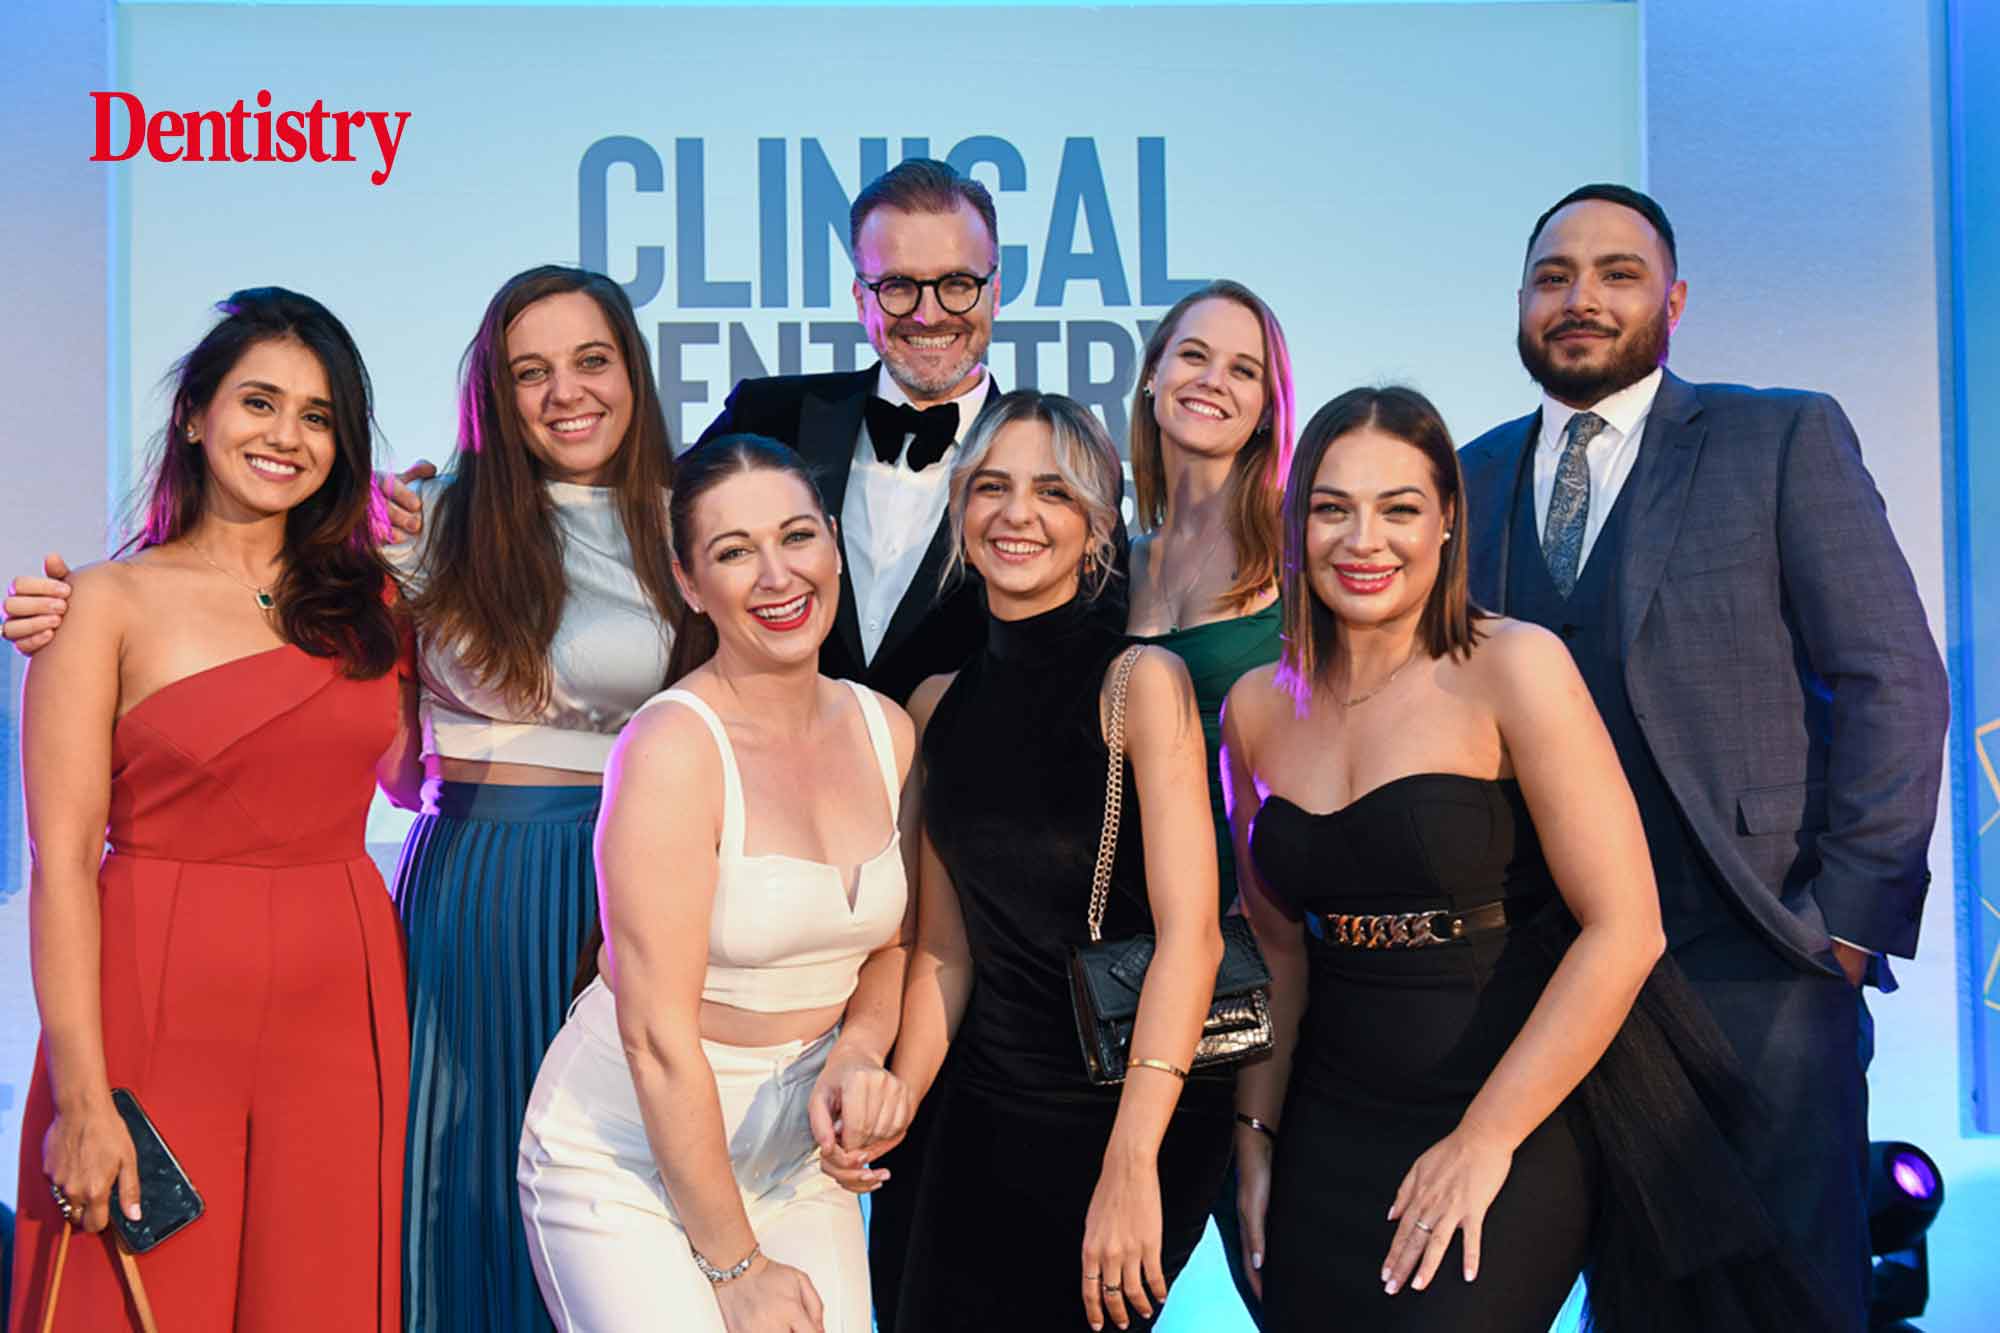 Last weekend the Clinical Dentistry Awards took place, recognising clinical excellence in practice – take a look at the fabulous pictures from the event and the full list of winners.